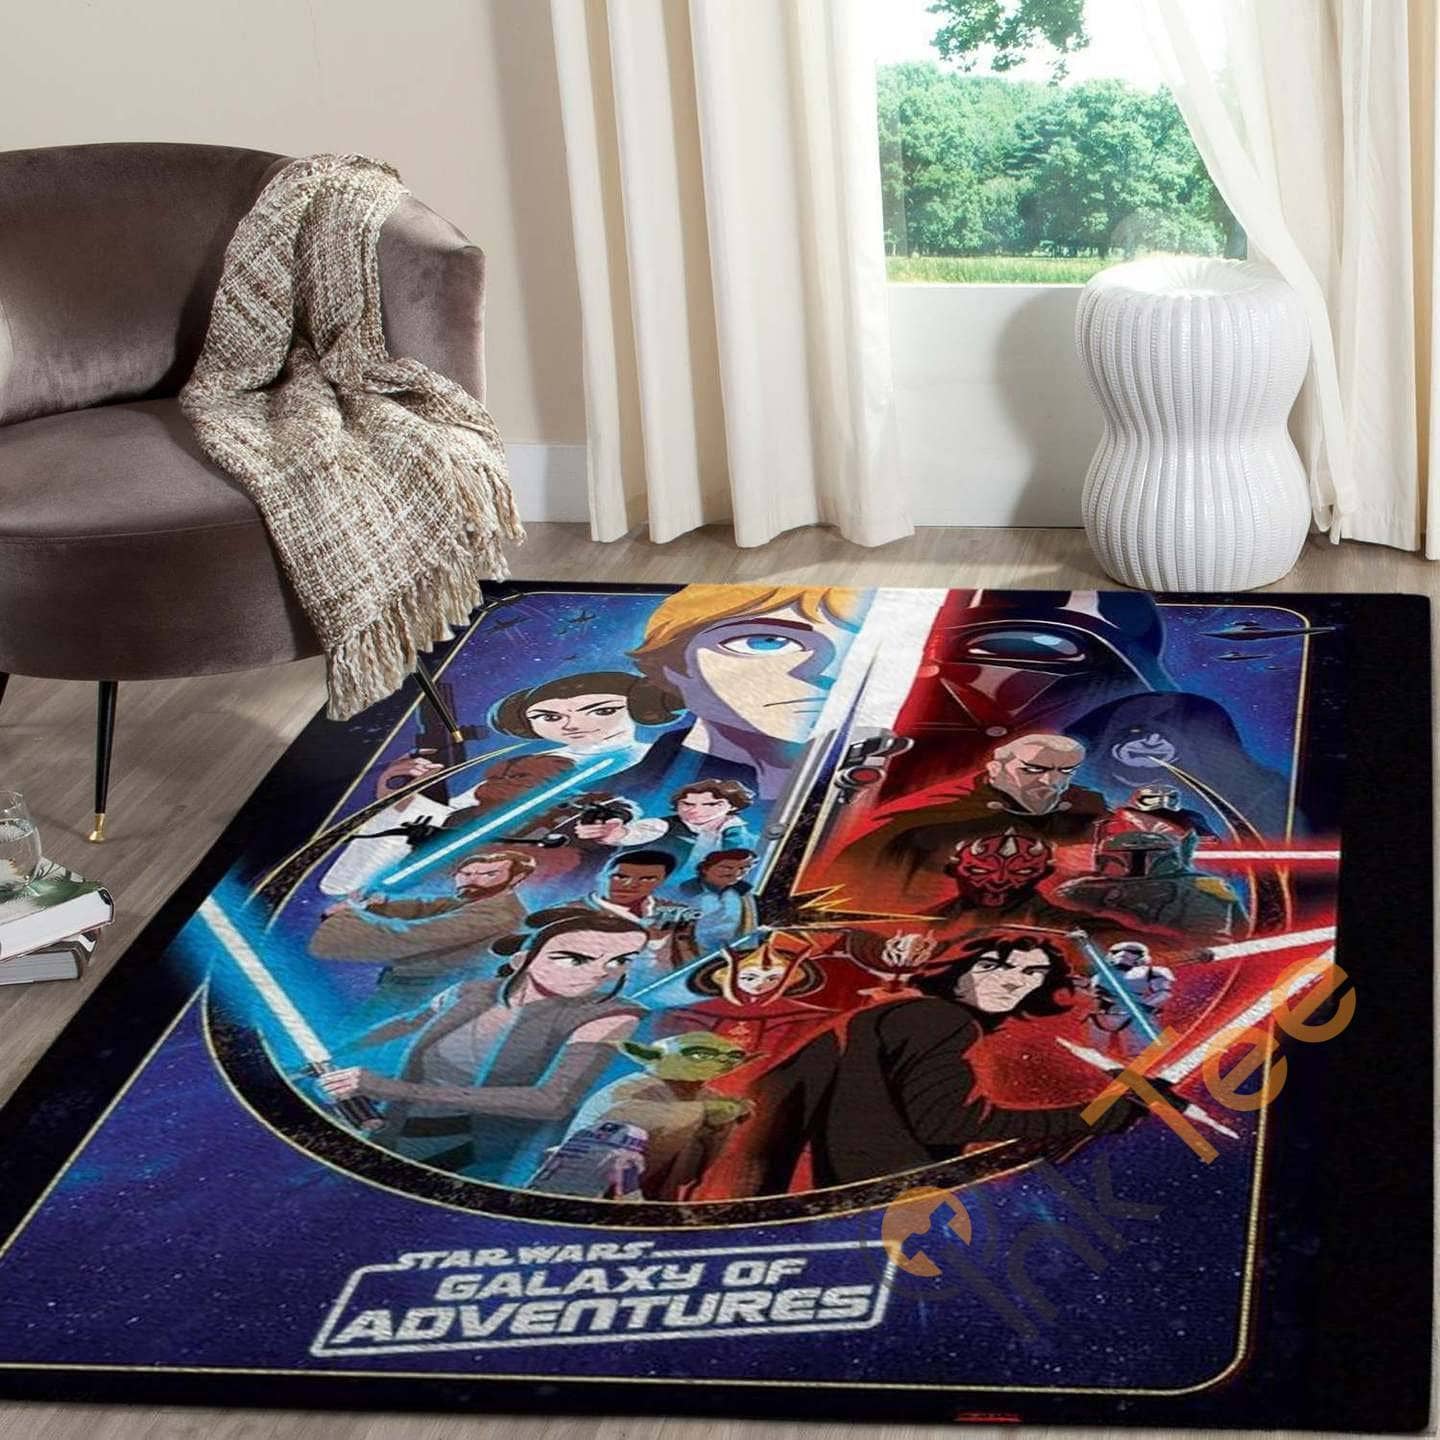 Star Wars Disney Lover I Love You To Bedroom Movies Gift For Lovers Rug